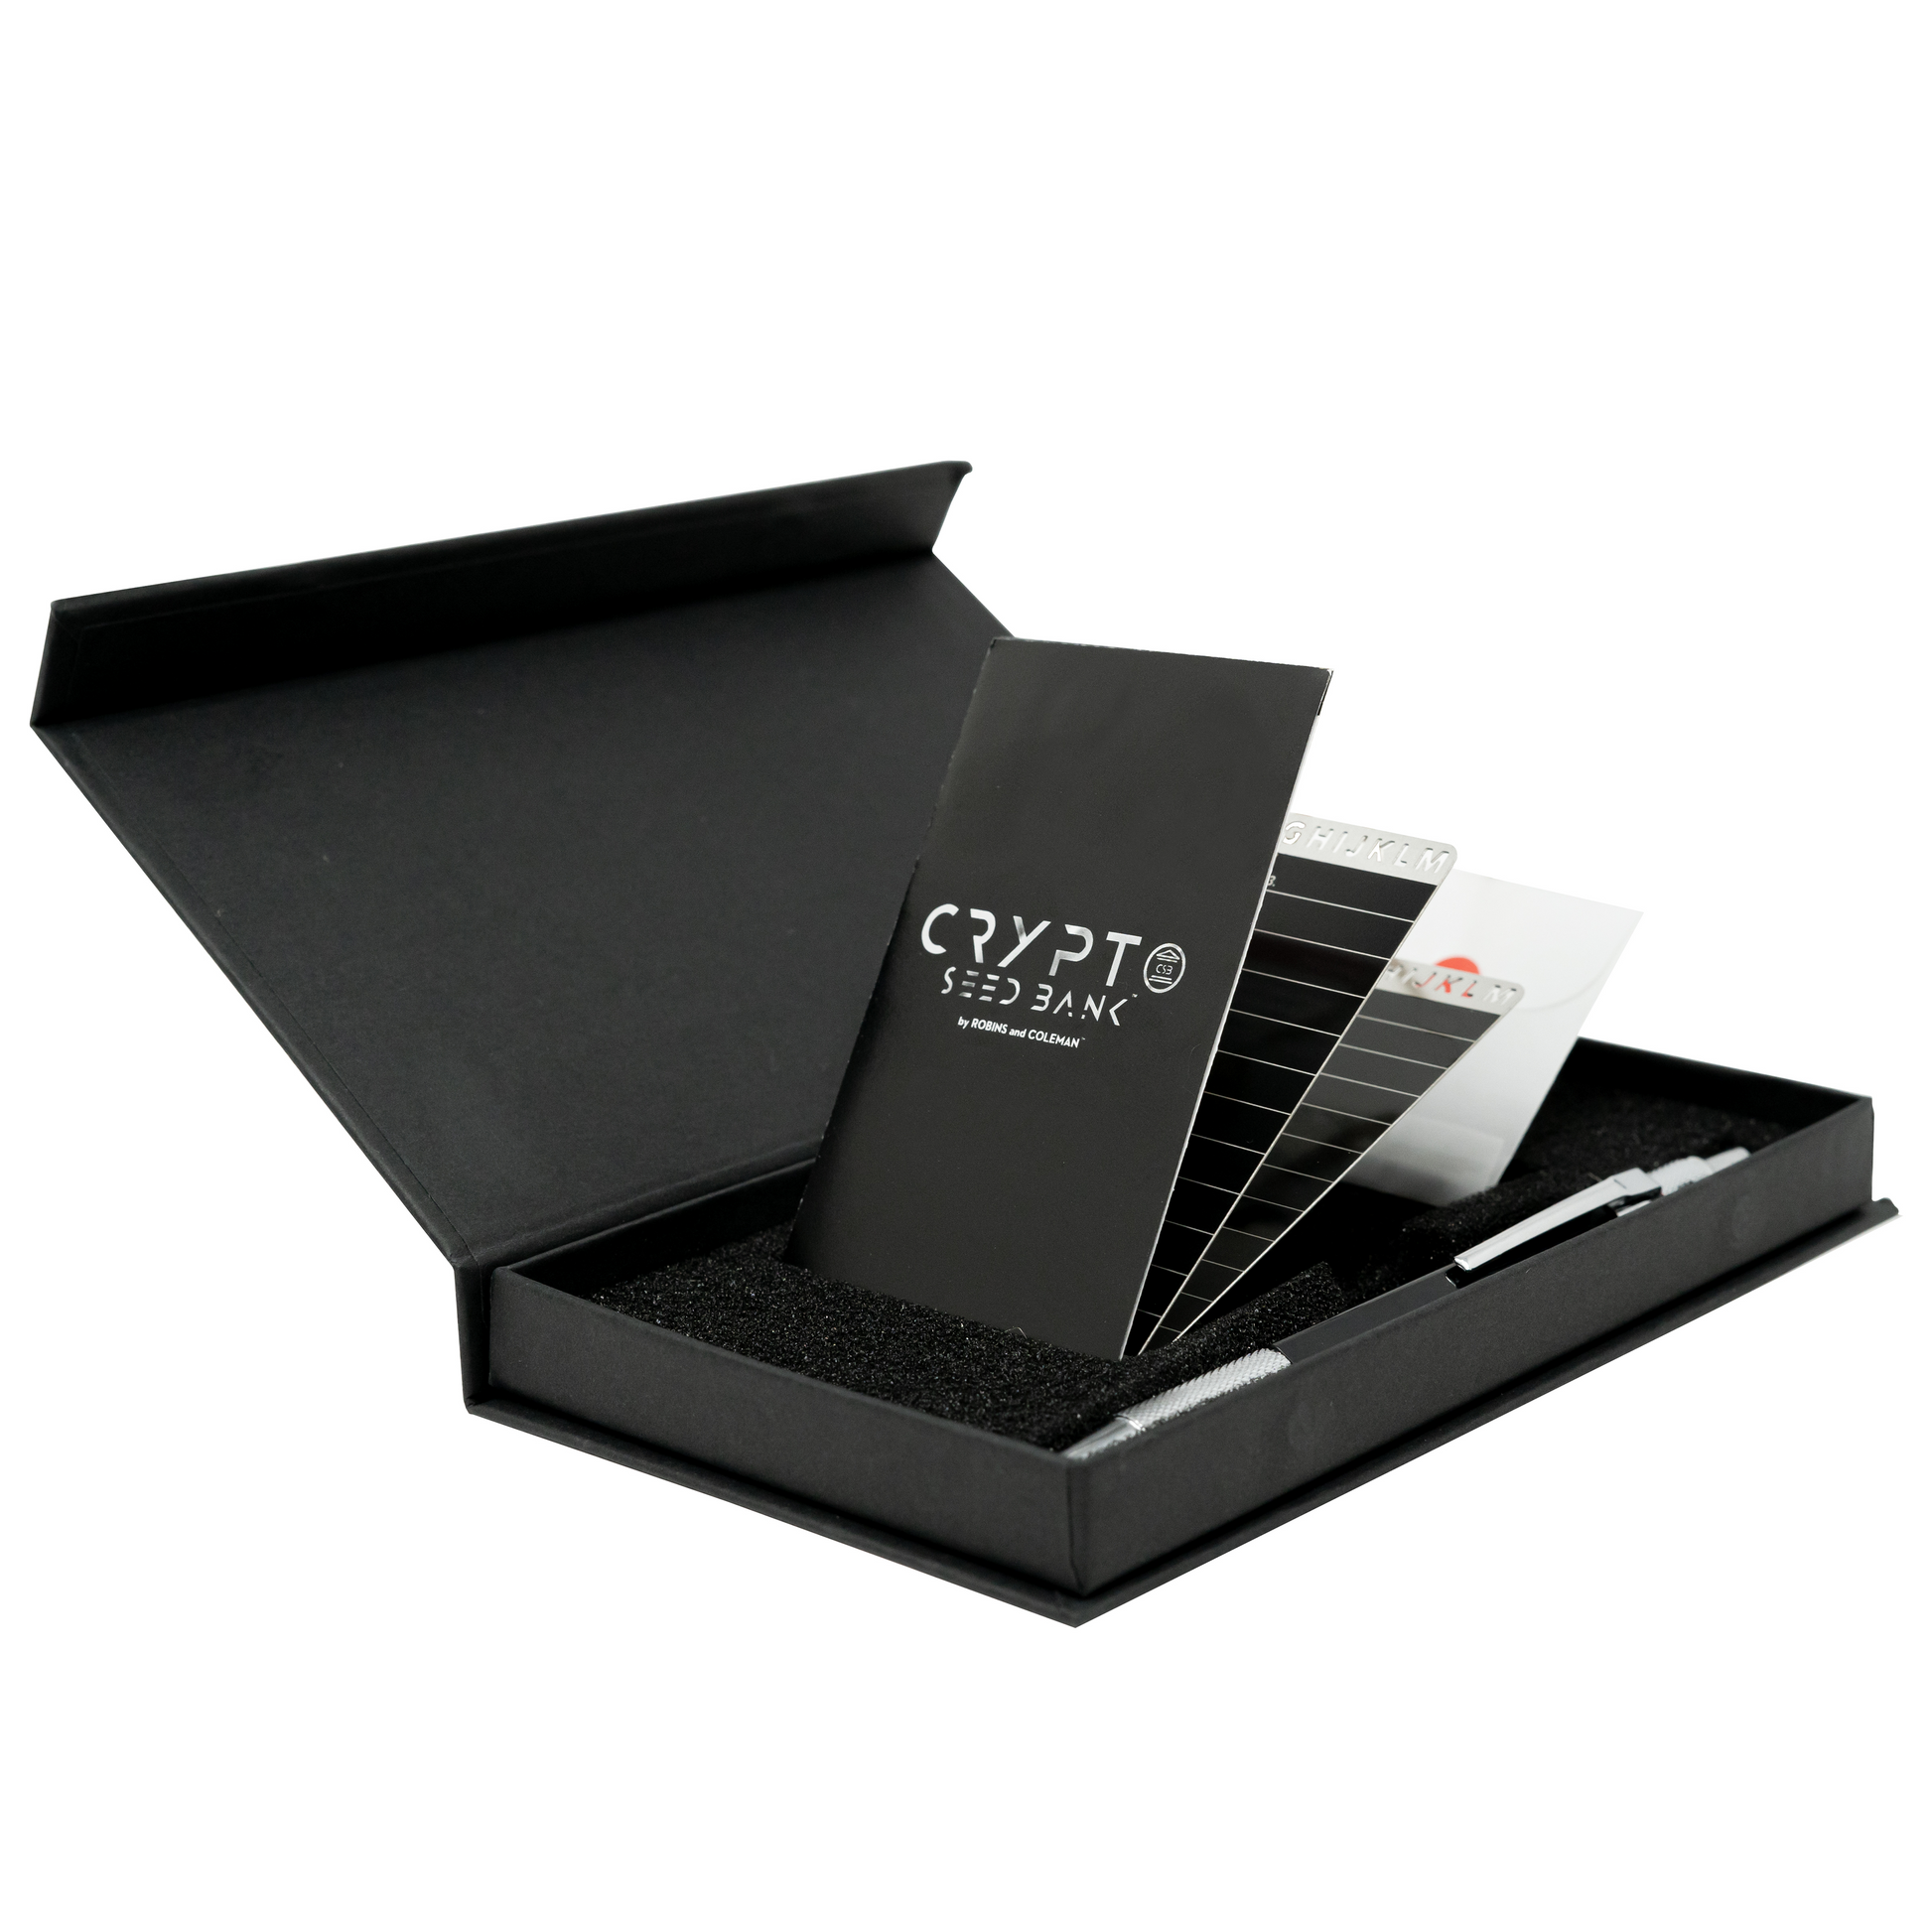 Crypto Seed Bank in product box - Cold wallet crypto - side facing